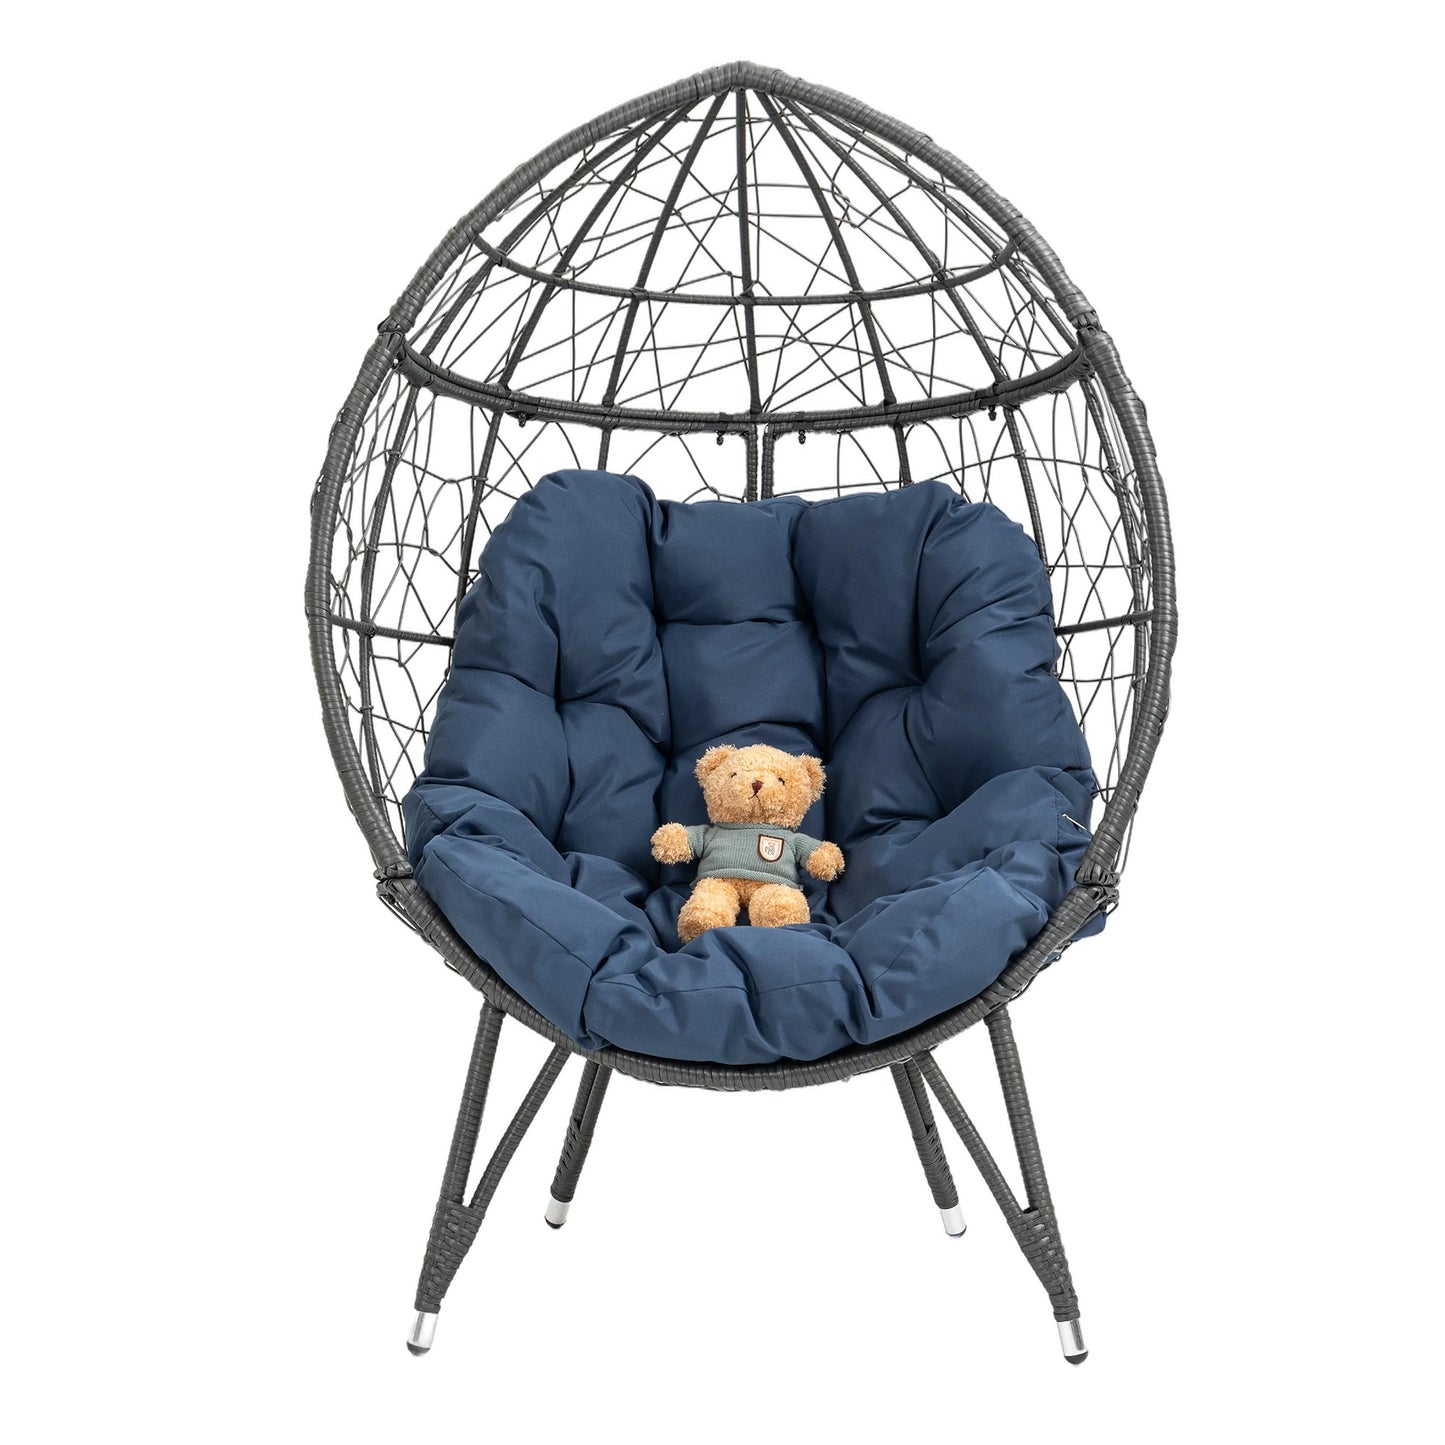 Patio Wicker Egg Chair Indoor Basket Wicker Chair with Navy Cusion for Backyard Poolside